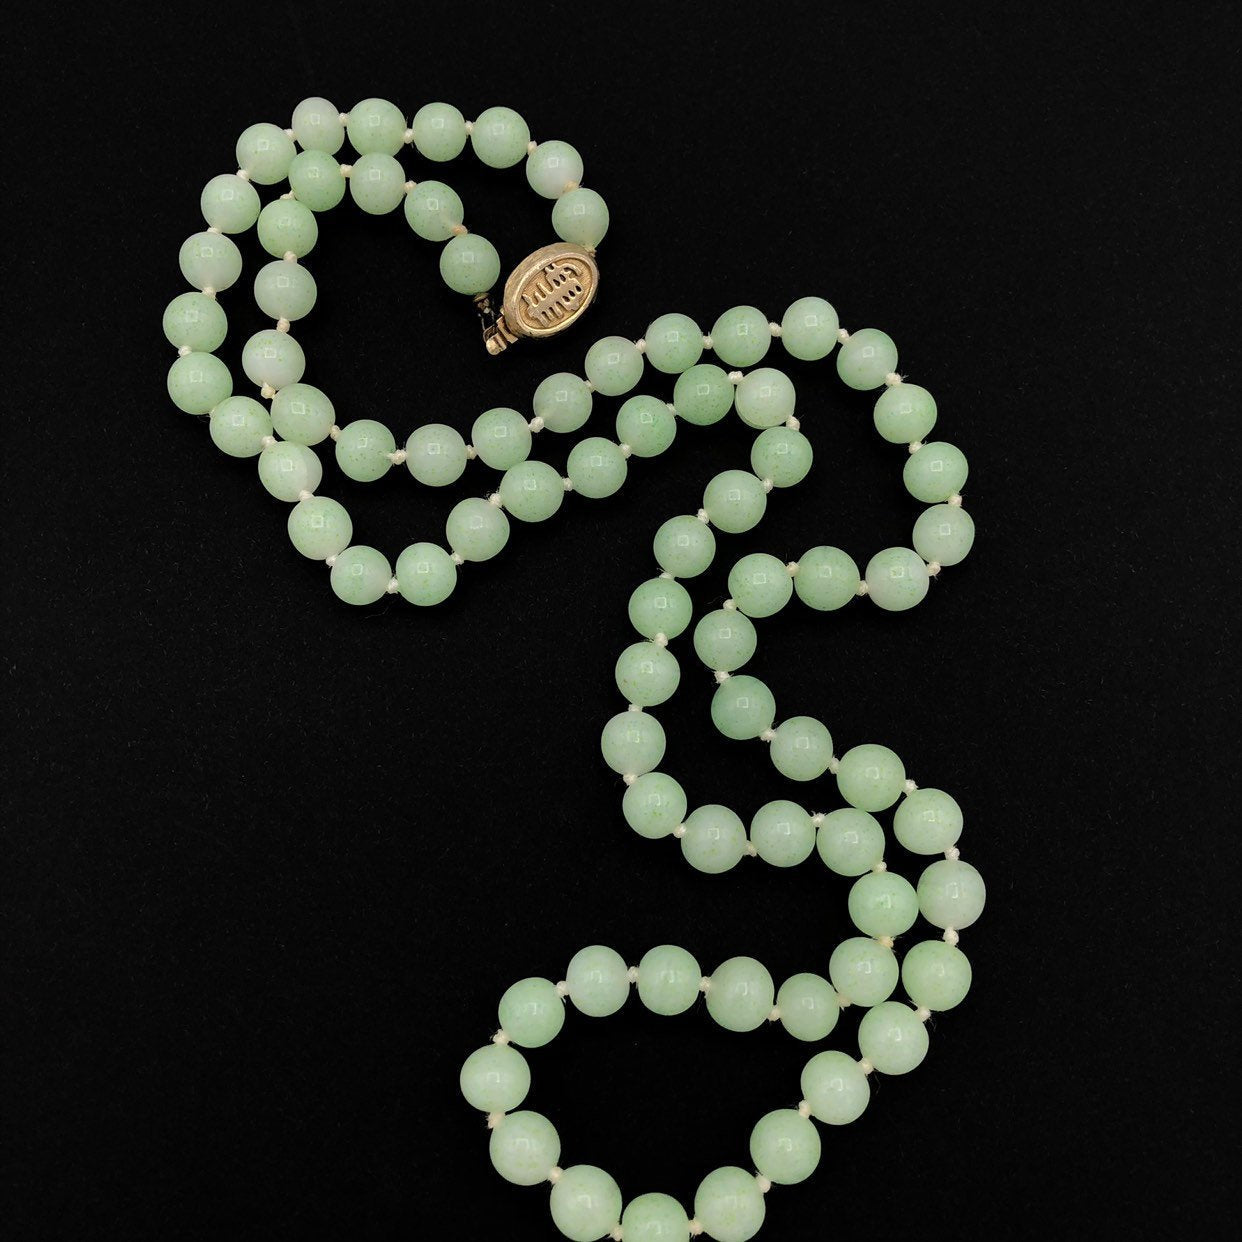 Buy Grade A Natural Dark Green Jade Beads 6mm 8mm 10mm 12mm Smooth Polished  Round 15 Inch Strand JA05 Wholesale Beads Online in India - Etsy